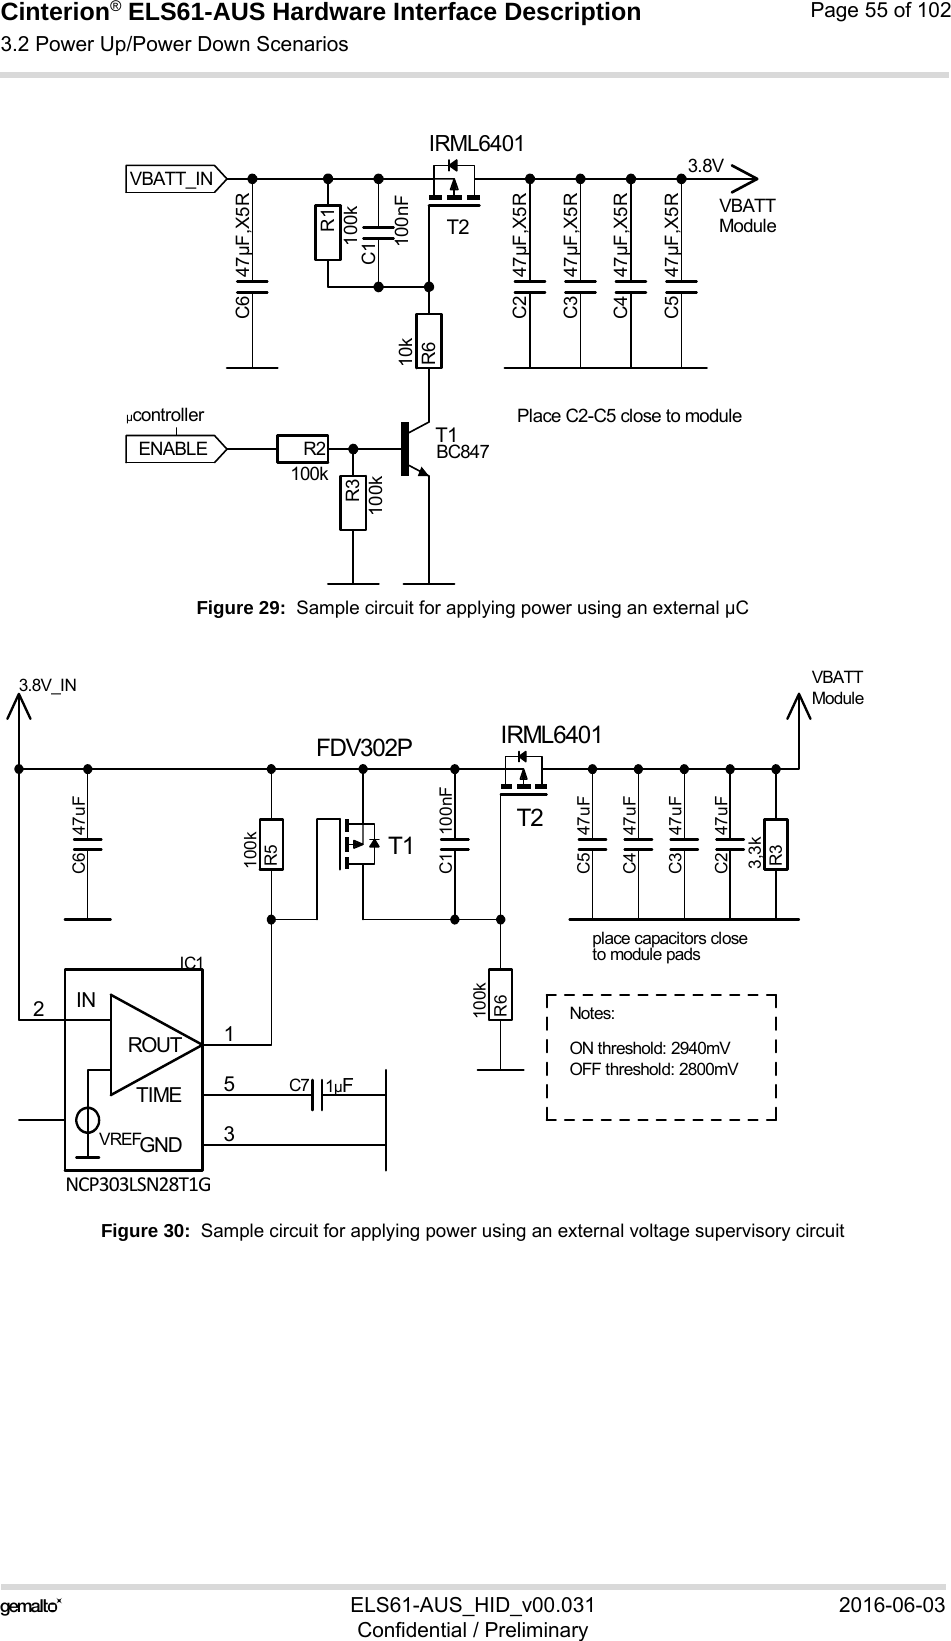 Cinterion® ELS61-AUS Hardware Interface Description3.2 Power Up/Power Down Scenarios73ELS61-AUS_HID_v00.031 2016-06-03Confidential / PreliminaryPage 55 of 102Figure 29:  Sample circuit for applying power using an external µCFigure 30:  Sample circuit for applying power using an external voltage supervisory circuit3.8VModulePlace C2-C5 close to moduleµcontrollerENABLEVBATTVBATT_INC1100nFC2 47µF,X5RC3 47µF,X5RC4 47µF,X5RC5 47µF,X5RC6 47µF,X5RR1100kR2100kR3100kR610kT1T2IRML6401BC847TBD.ON threshold: 2940mVNotes:OFF threshold: 2800mVplace capacitors closeto module pads3.8V_IN VBATTModuleC1 100nFC2 47uFC3 47uFC4 47uFC5 47uFC6 47uFC7 1µFGND 32ROUT 1TIME 5INVREFIC1R33,3kR5100kR6100kT1FDV302PT2IRML6401NCP303LSN28T1G